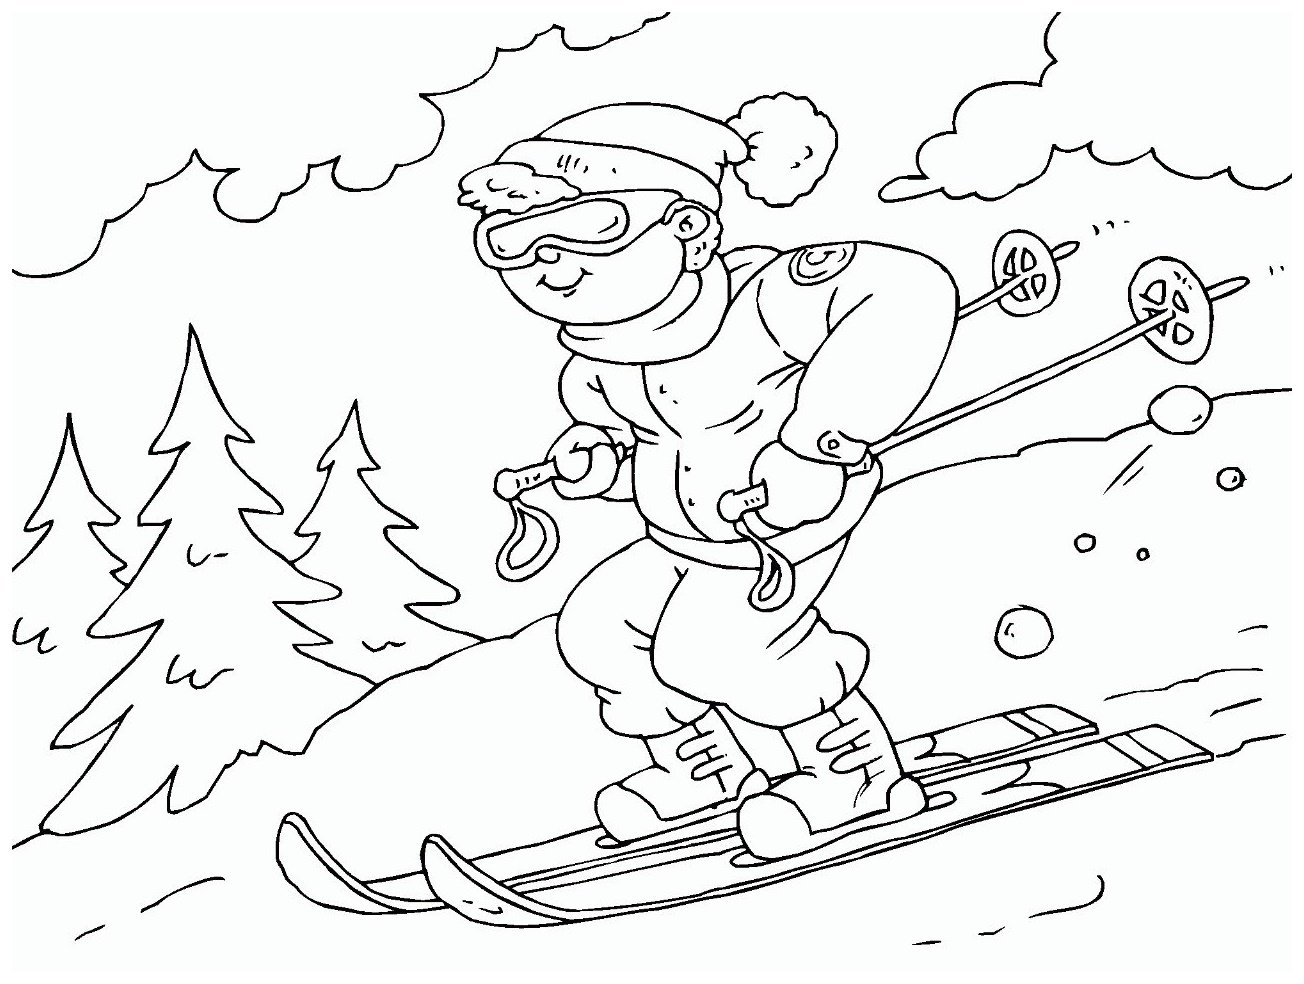 Fabulous skier coloring book for kids